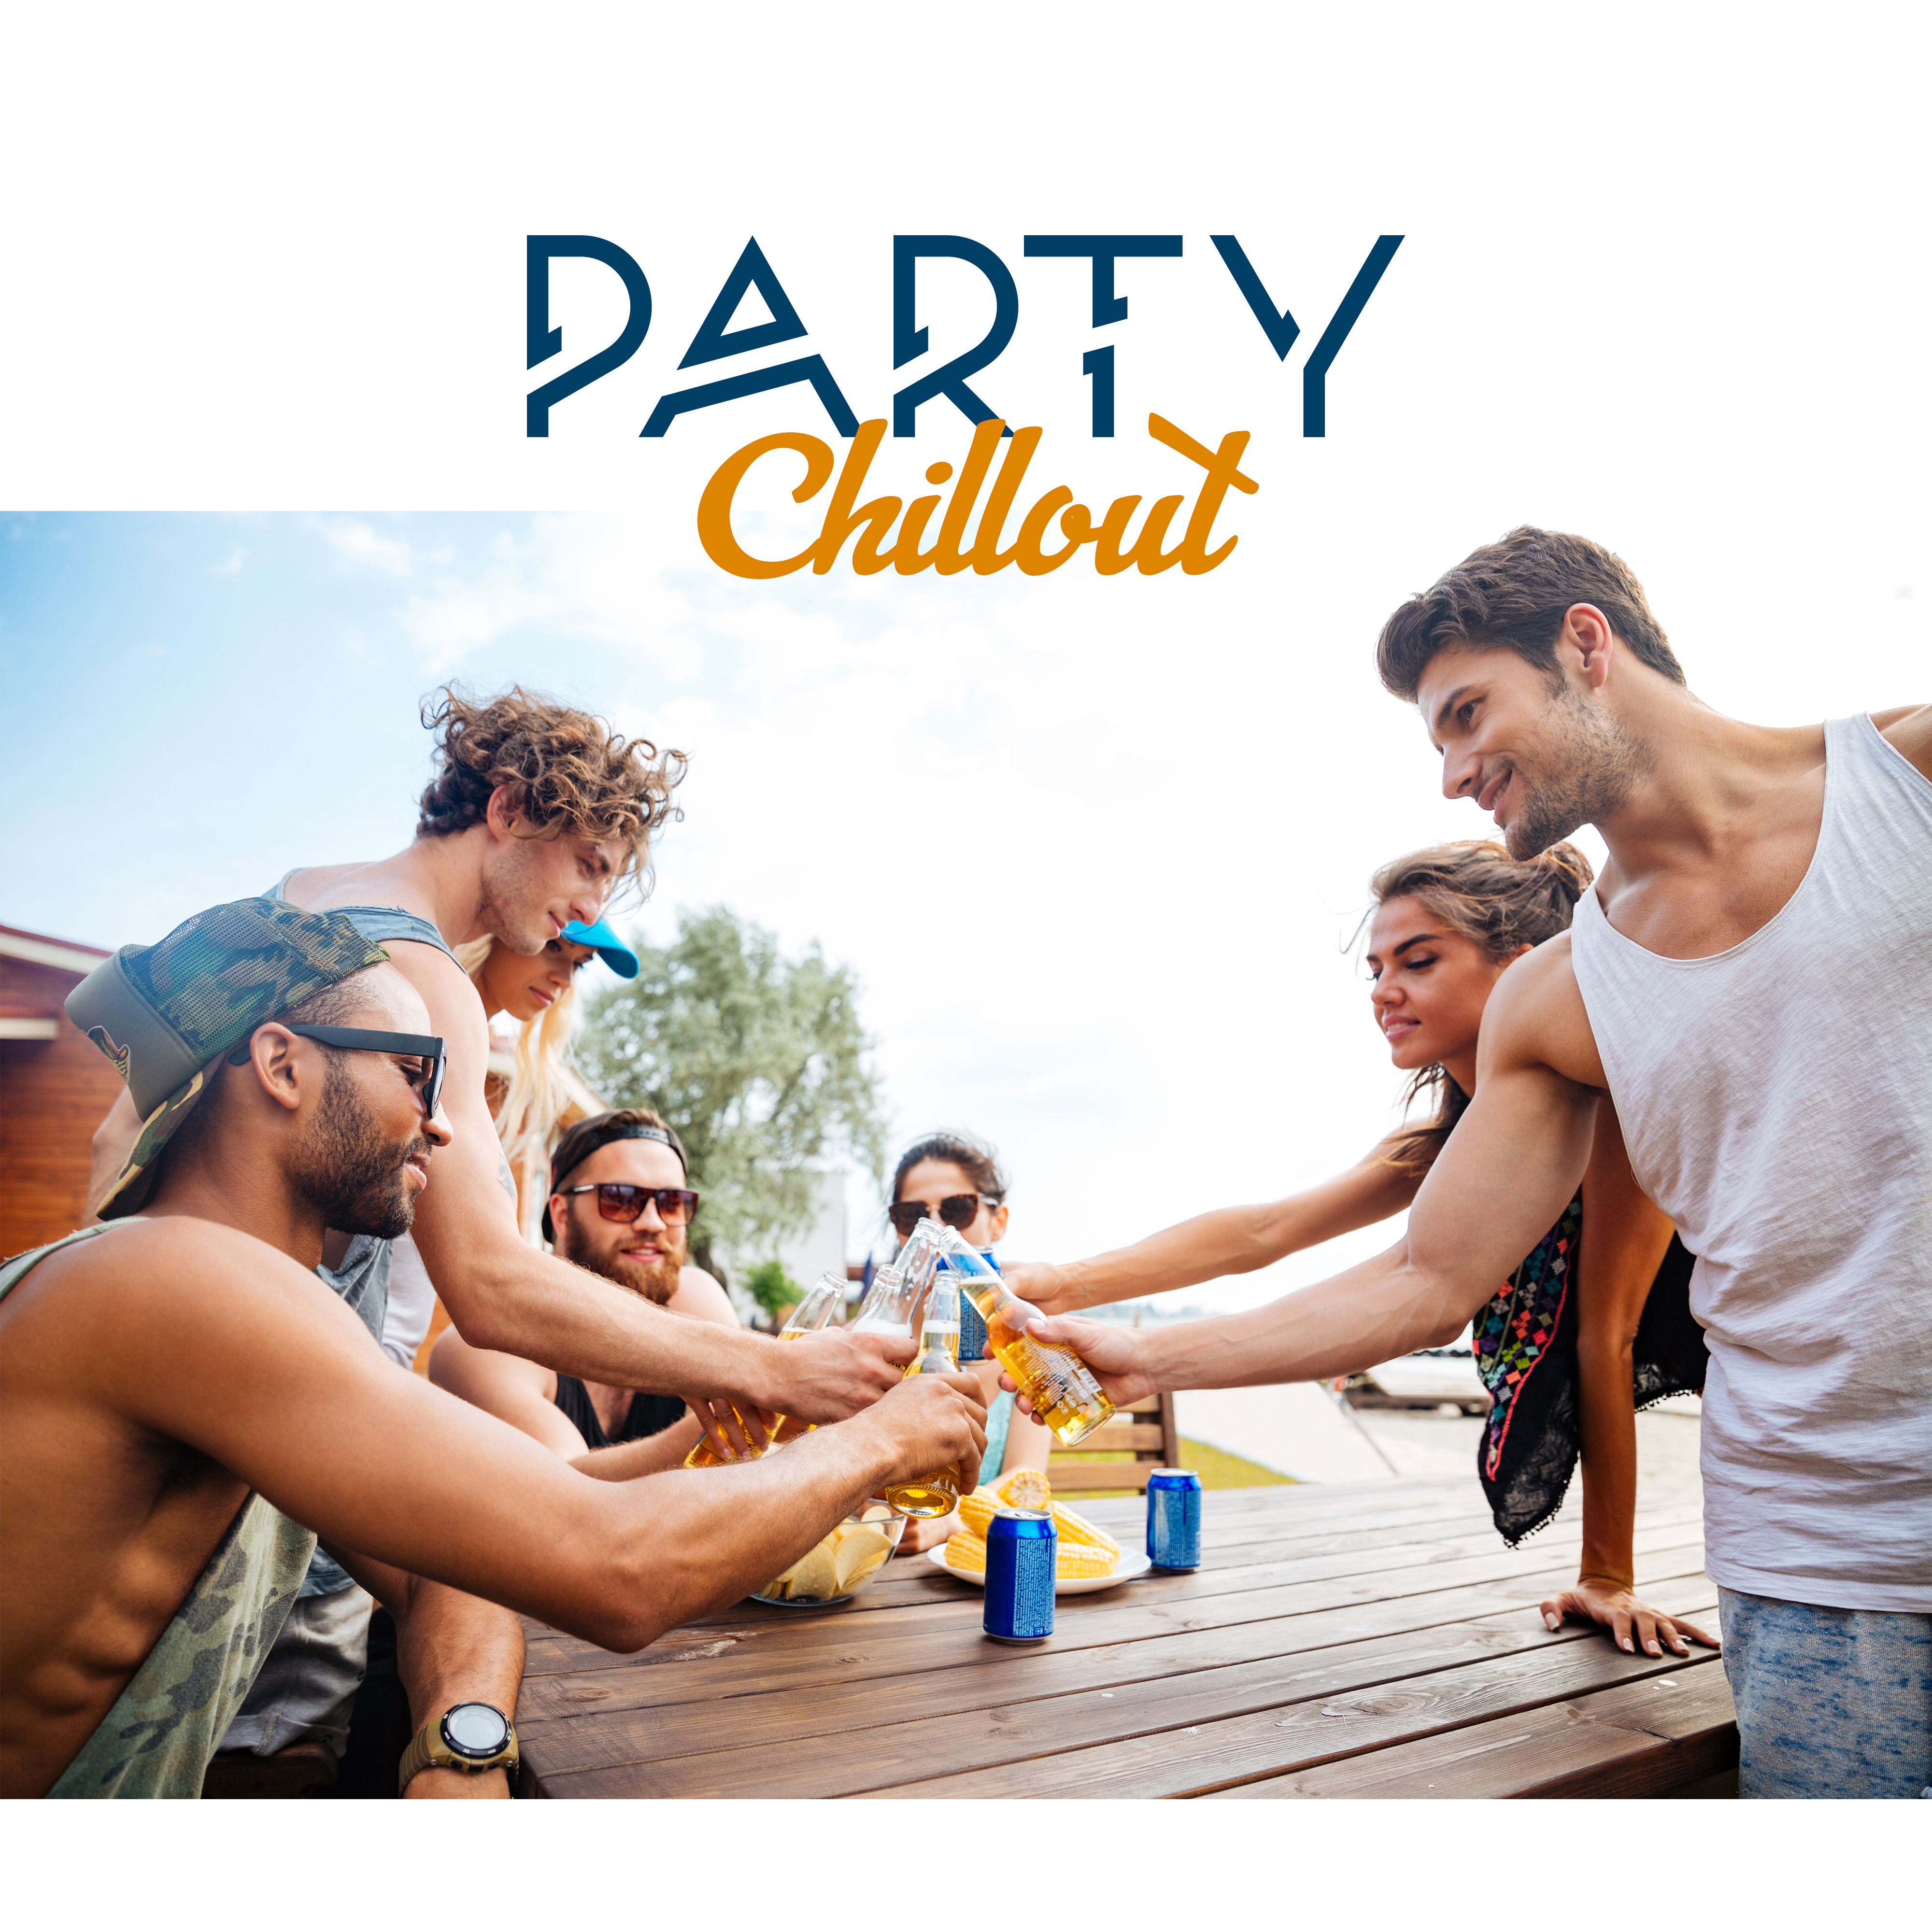 Party Chillout – Summer Chill, Drink Bar, Beach Party, Relaxation, Holiday Chill, Ibiza Lounge, Summer Sounds, Dancefloor